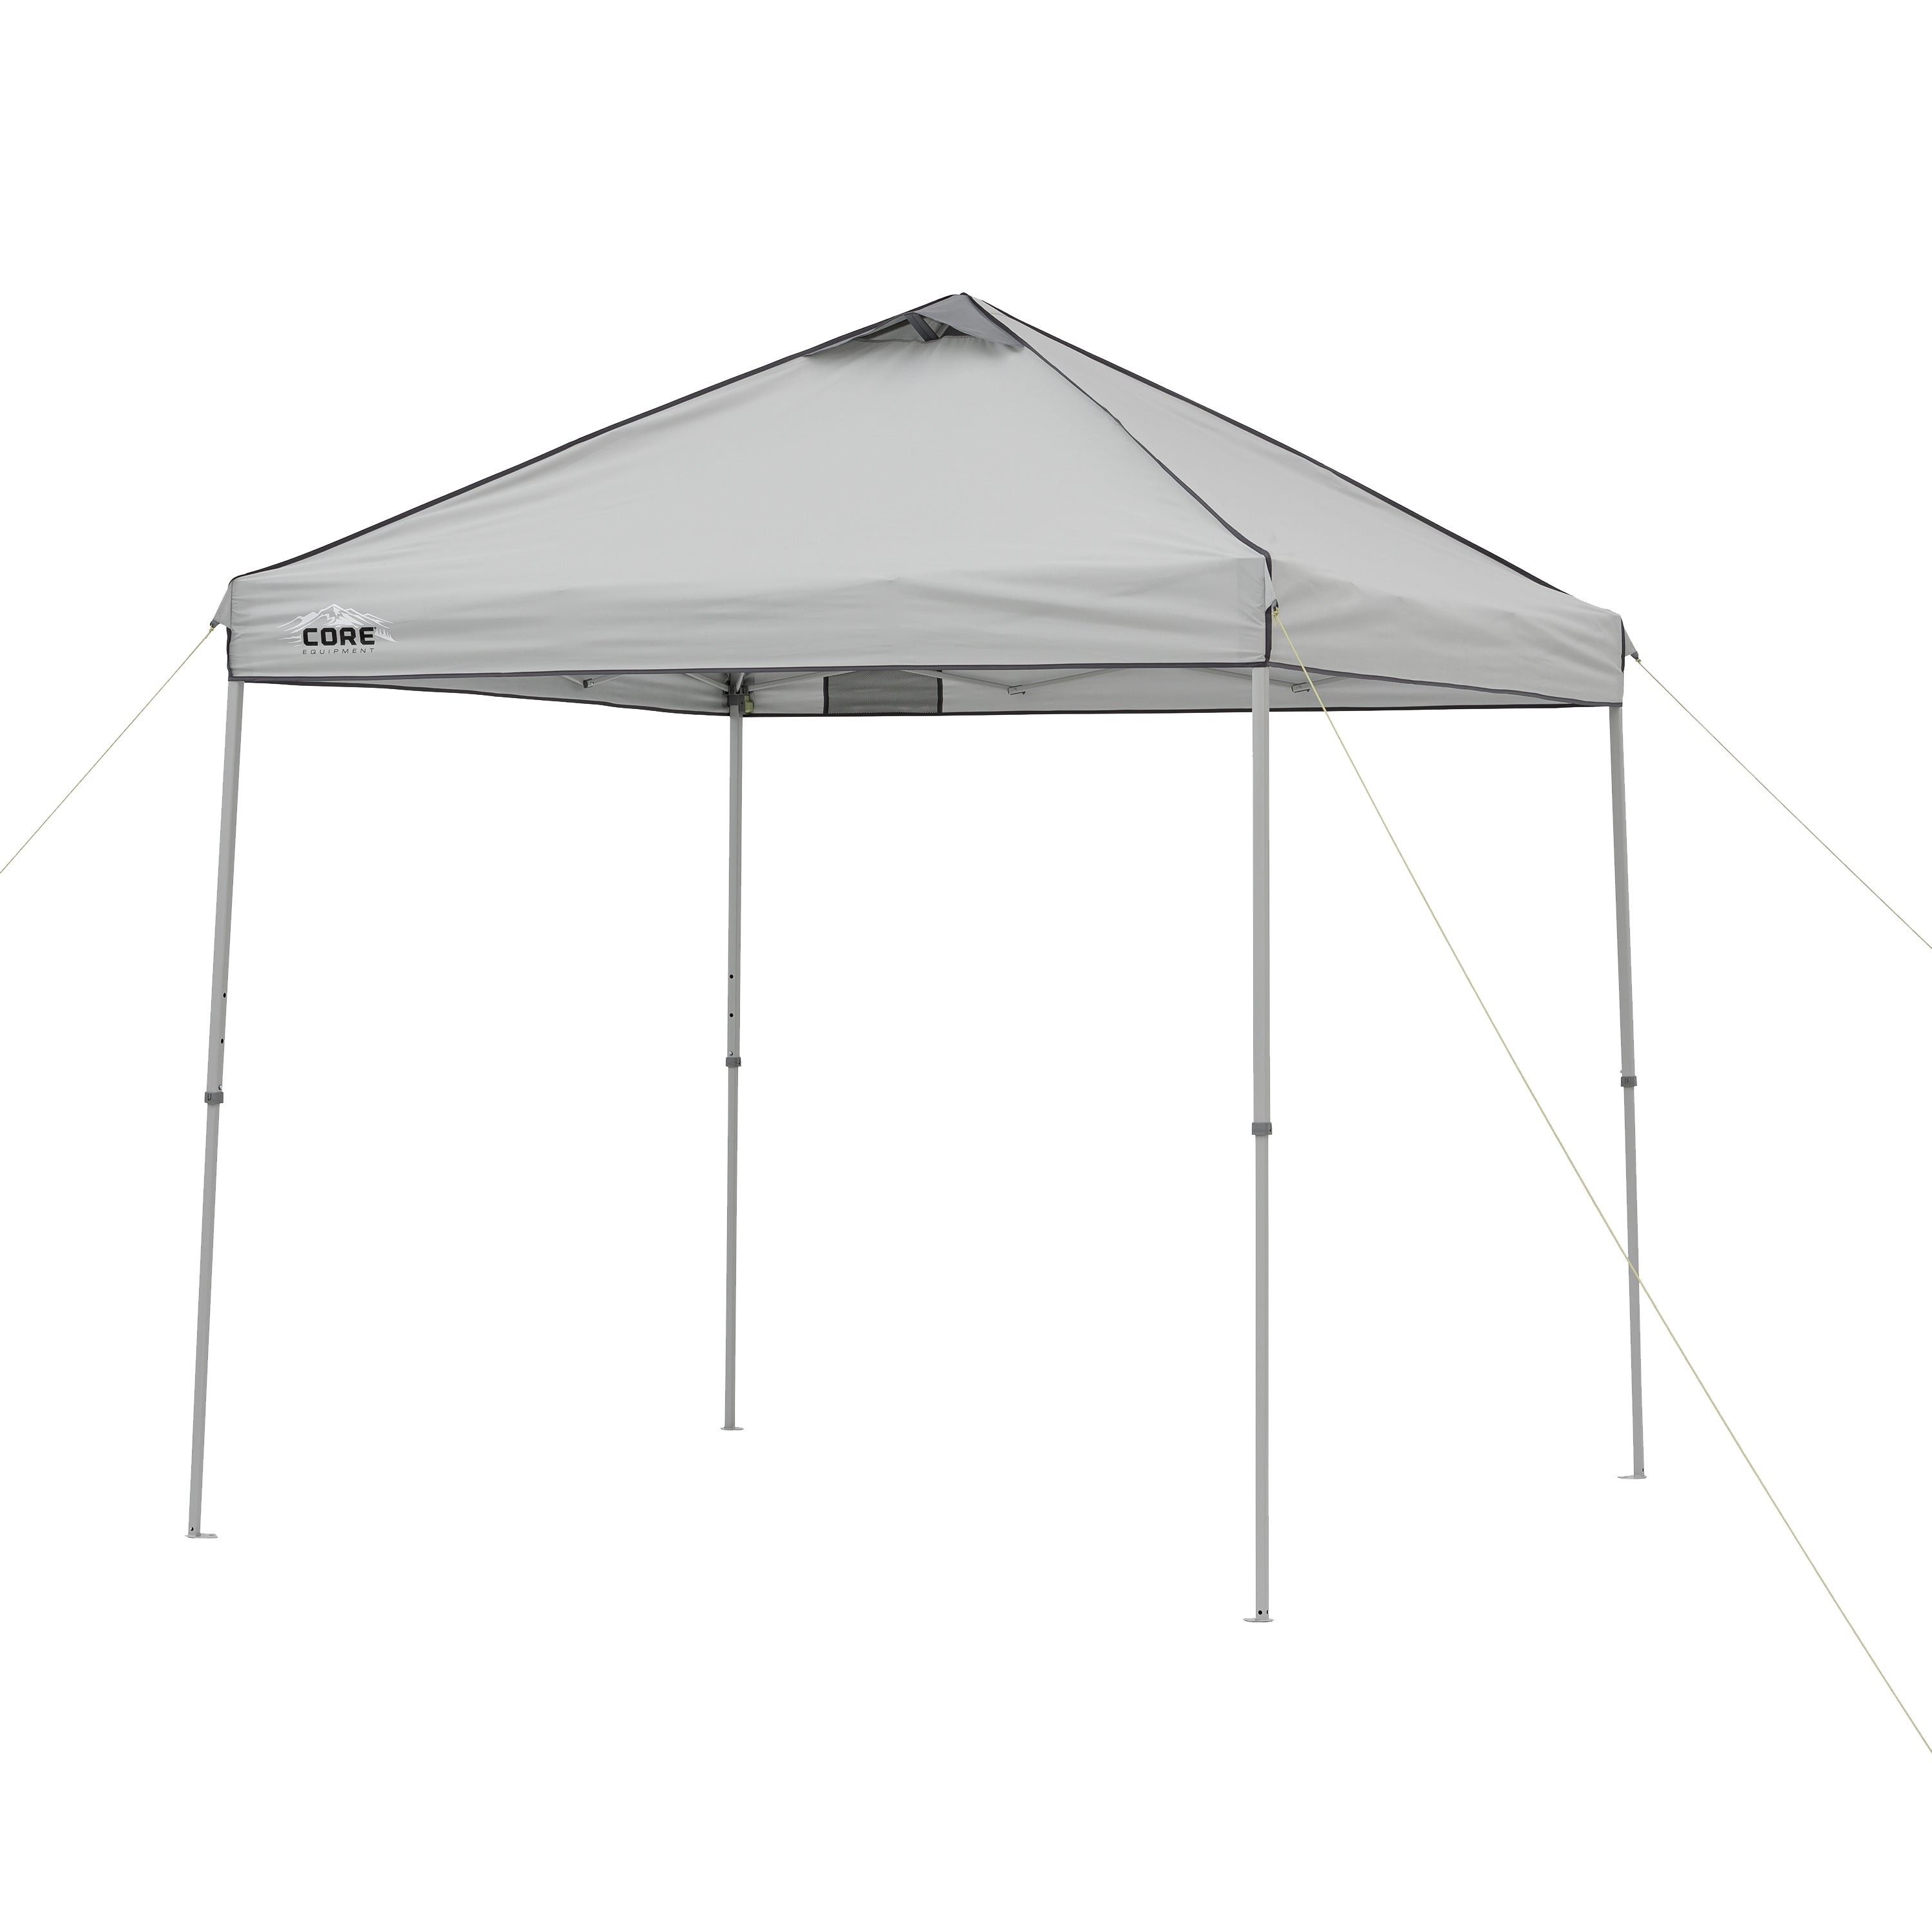 8ft x 8ft Instant Canopy